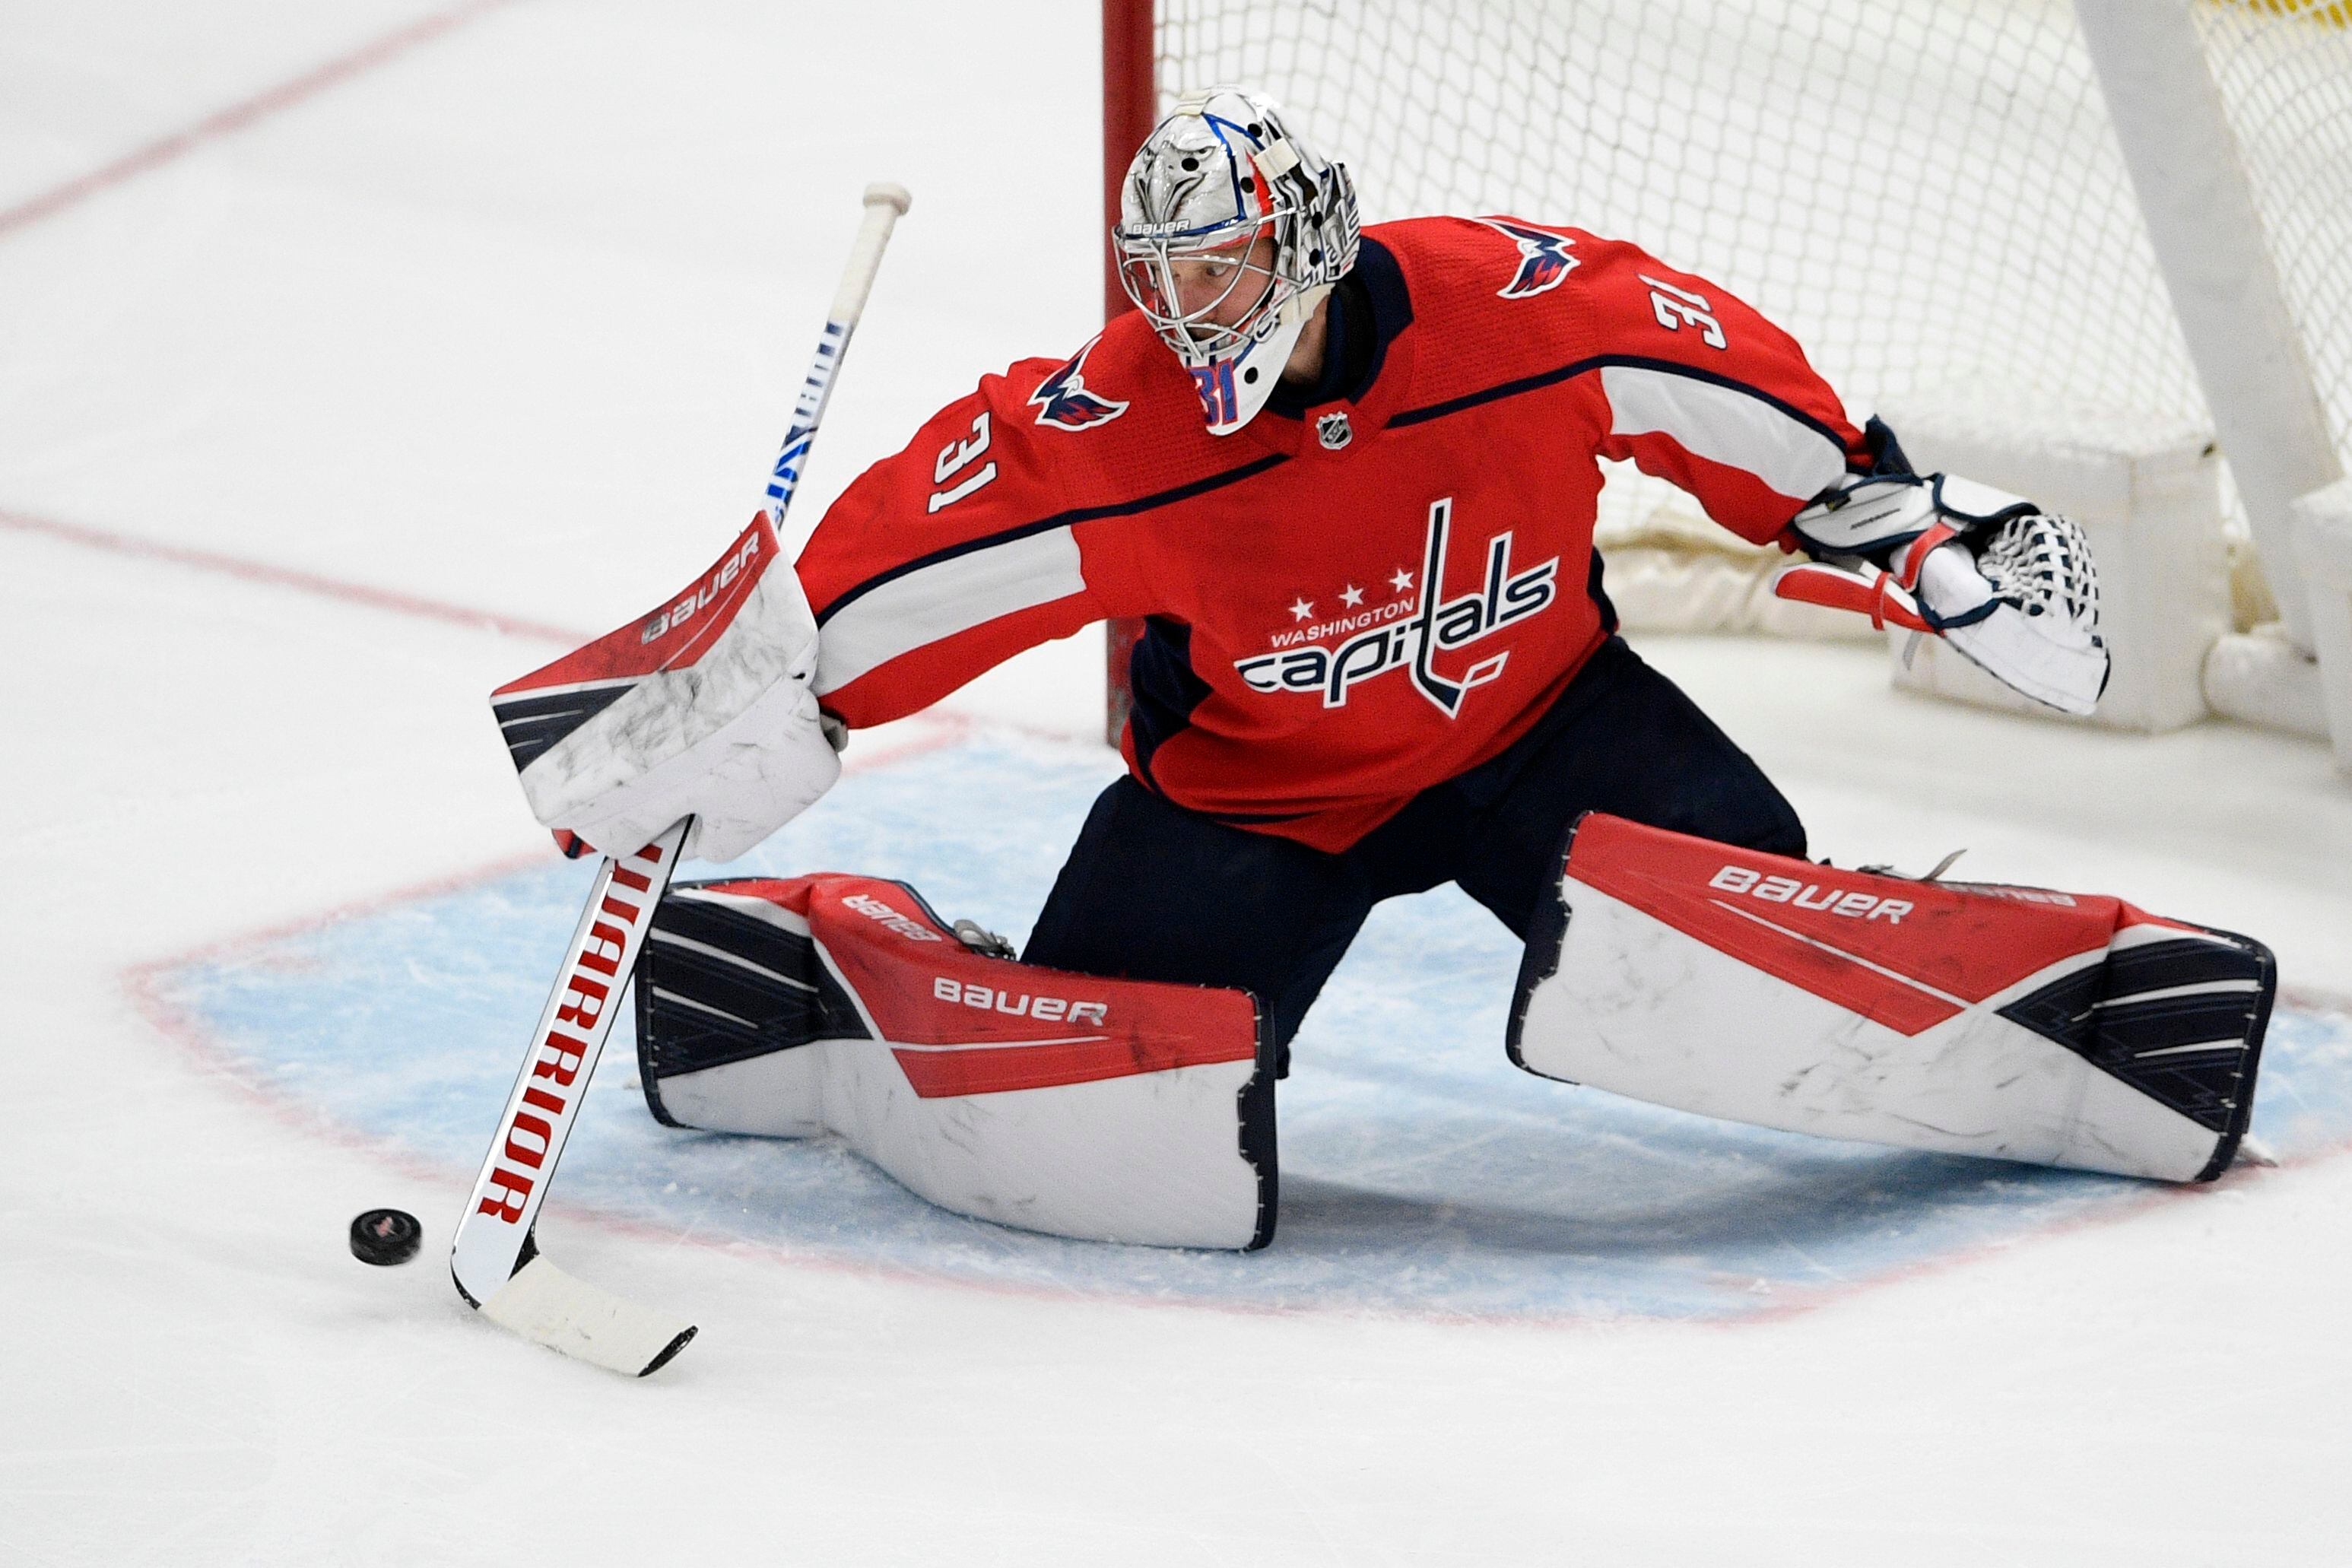 Banged-up Capitals: Surgery possible for Backstrom, Wilson